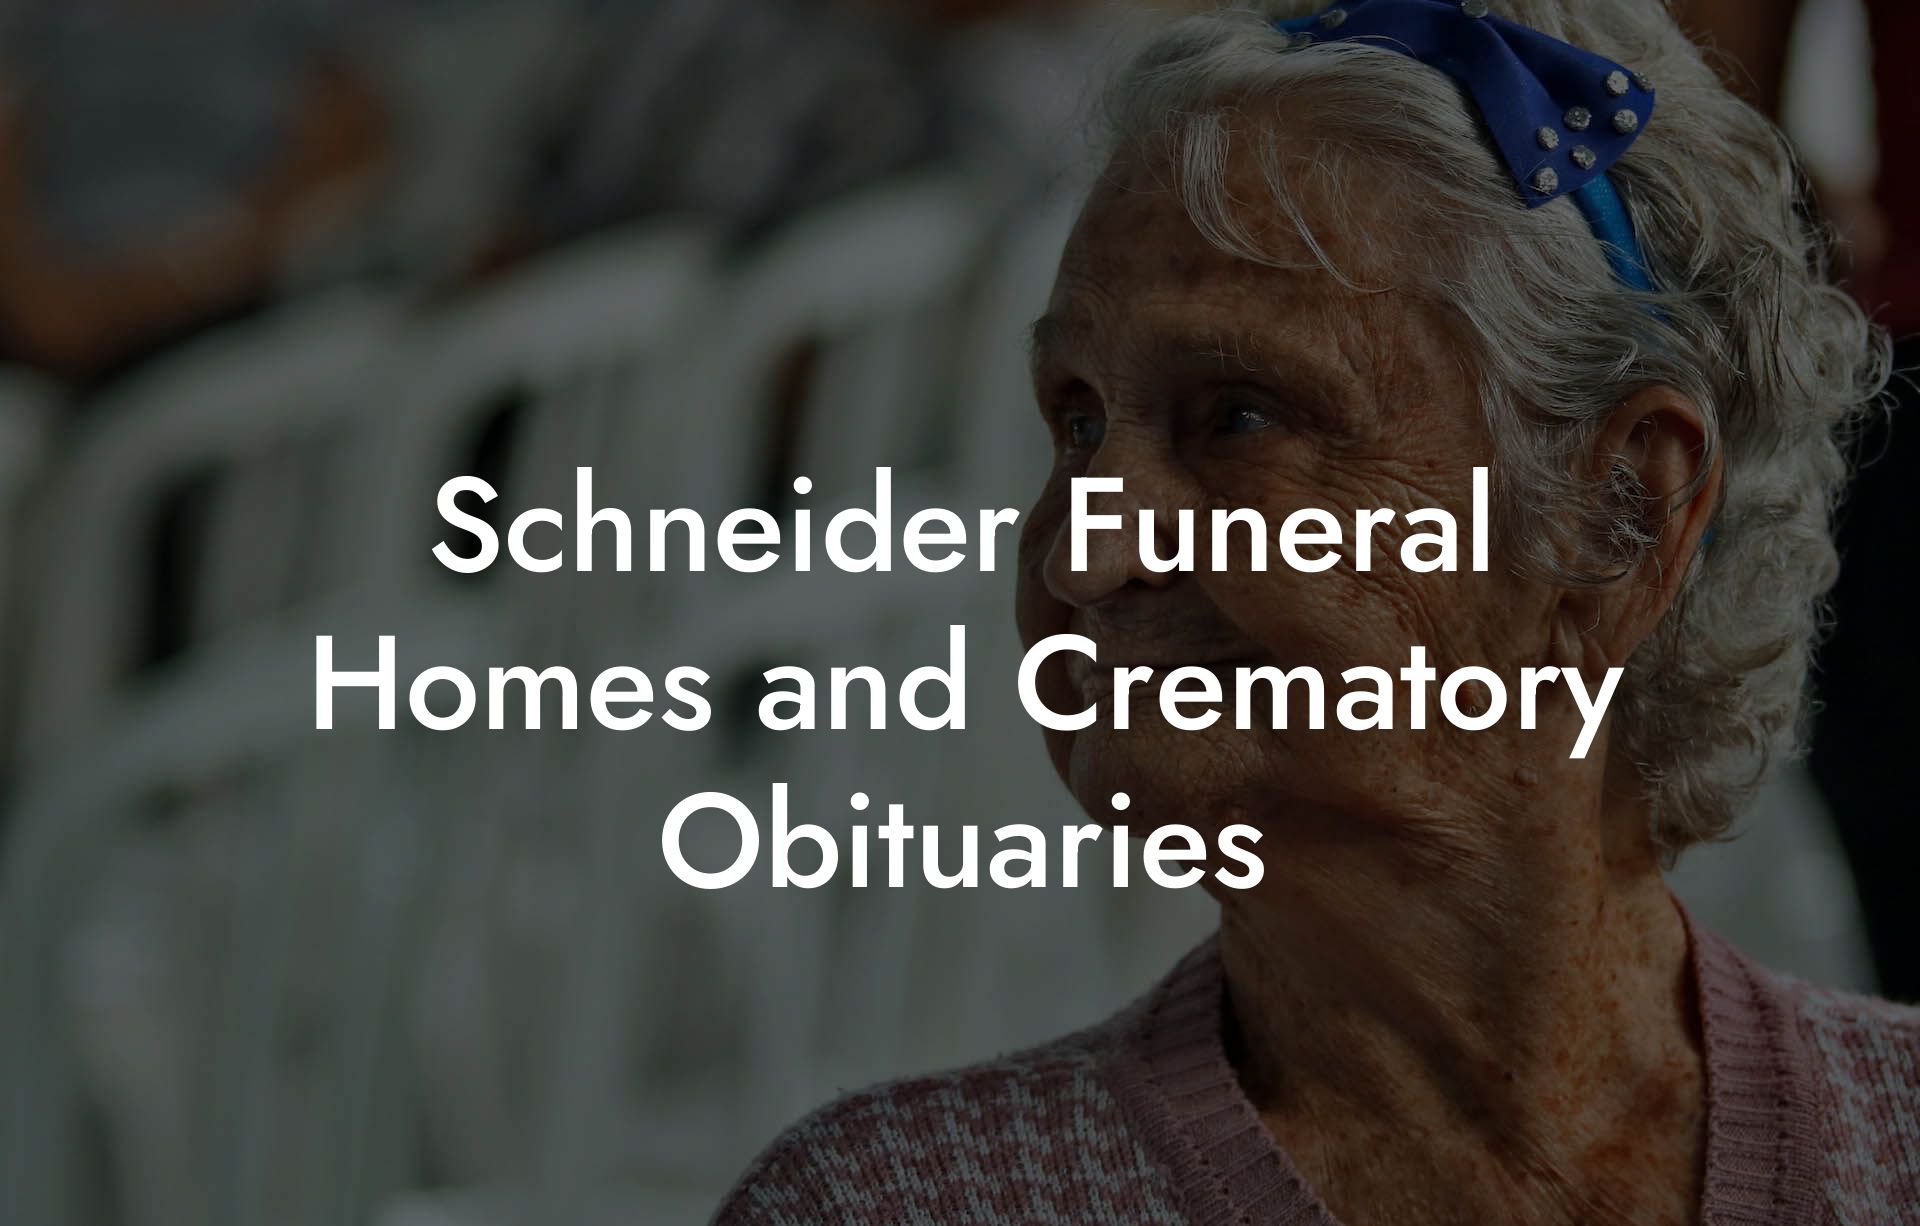 Schneider Funeral Homes and Crematory Obituaries